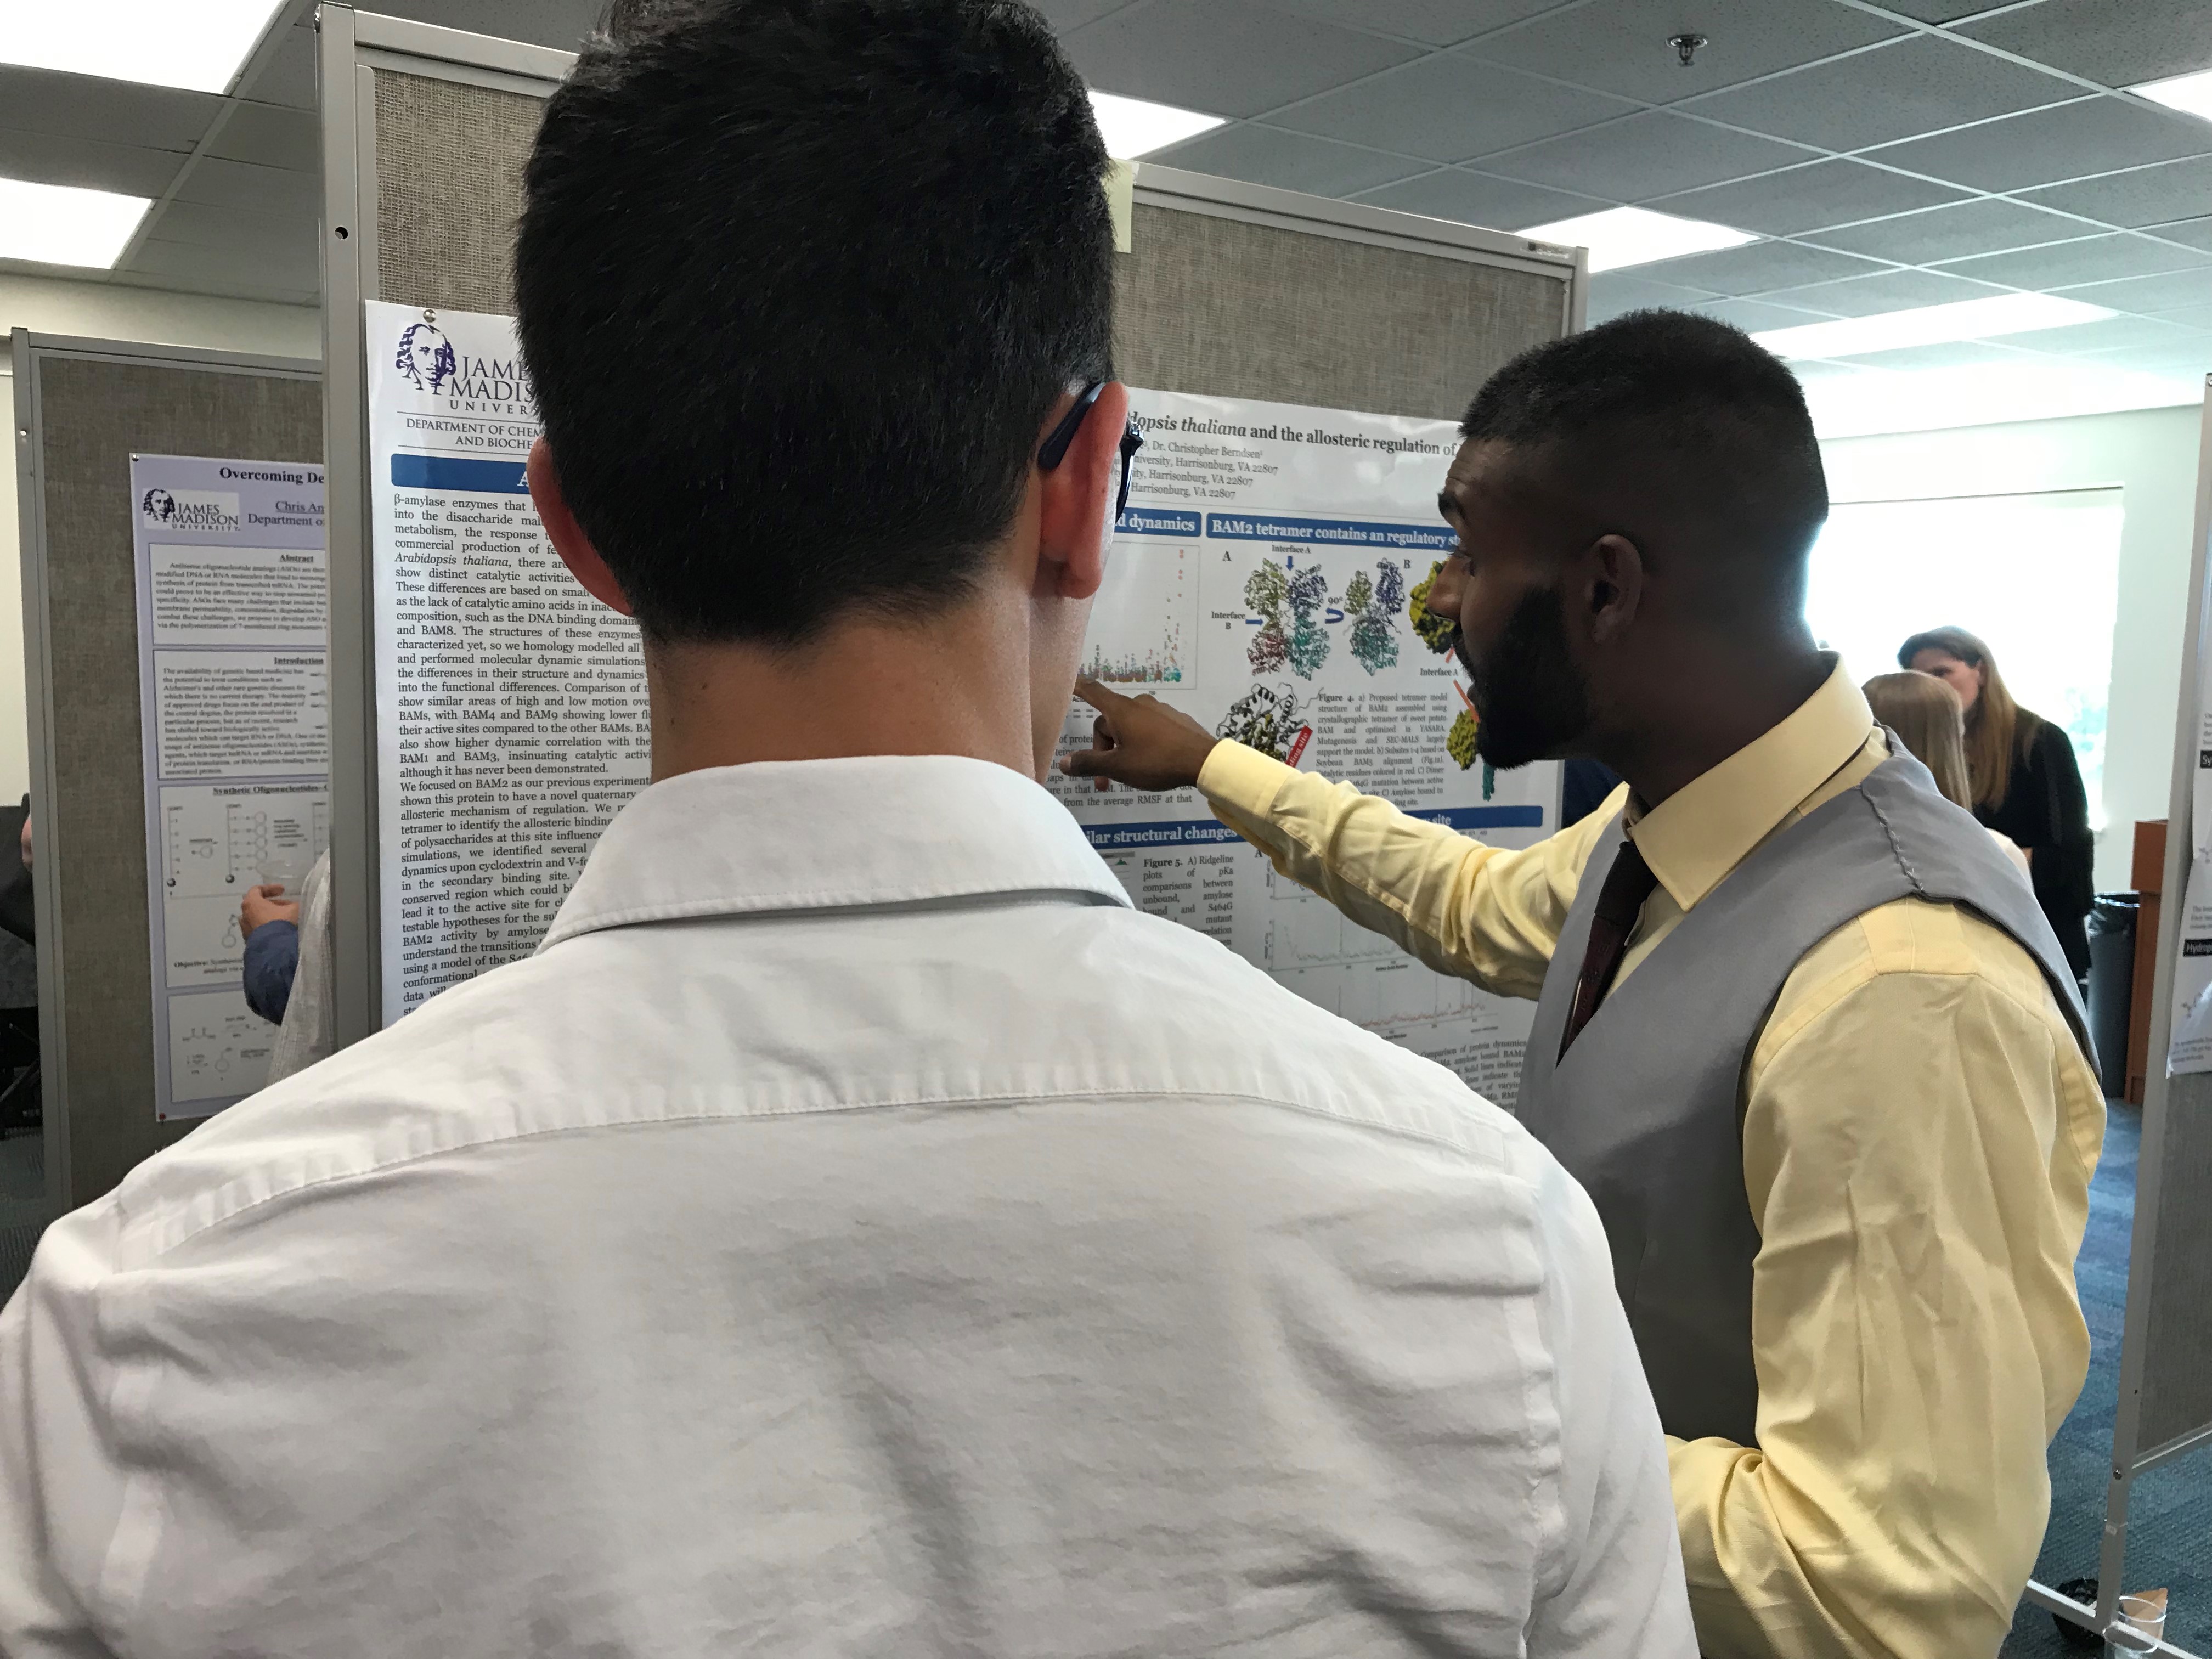 Nithesh showing his poster at the end of summer symposium